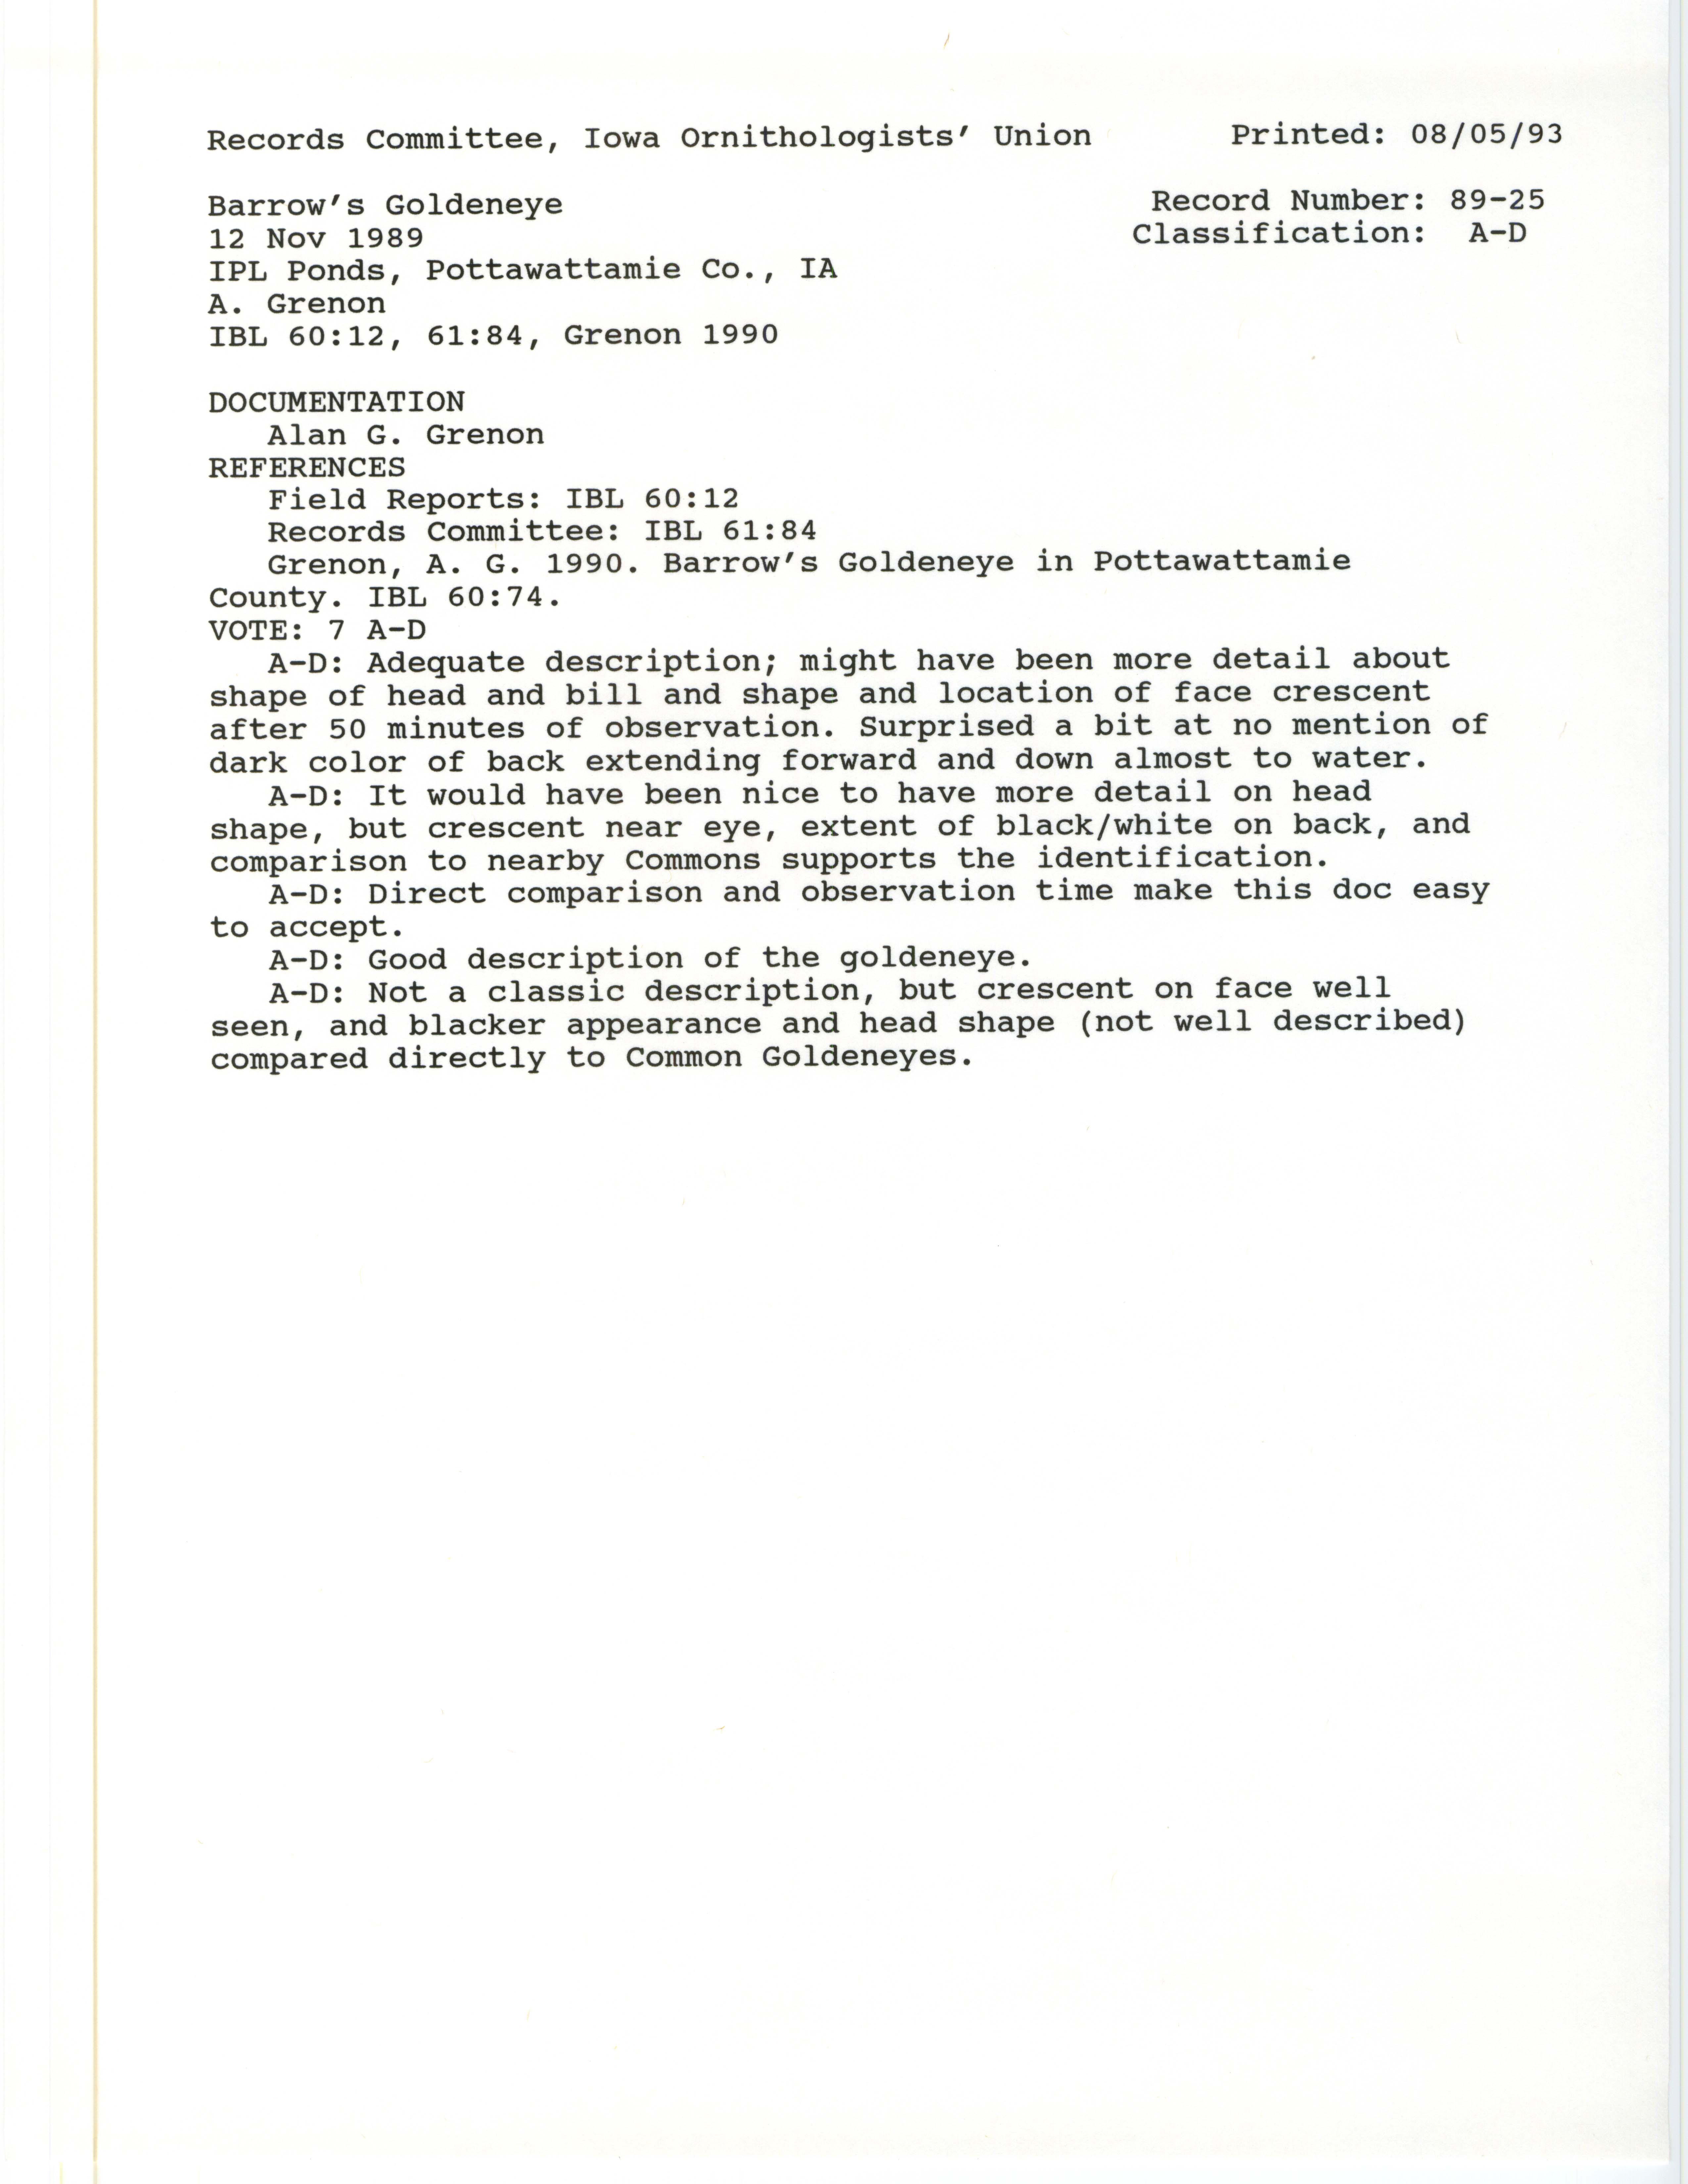 Records Committee review for rare bird sighting for Barrow's Goldeneye at IPL Ponds, 1989